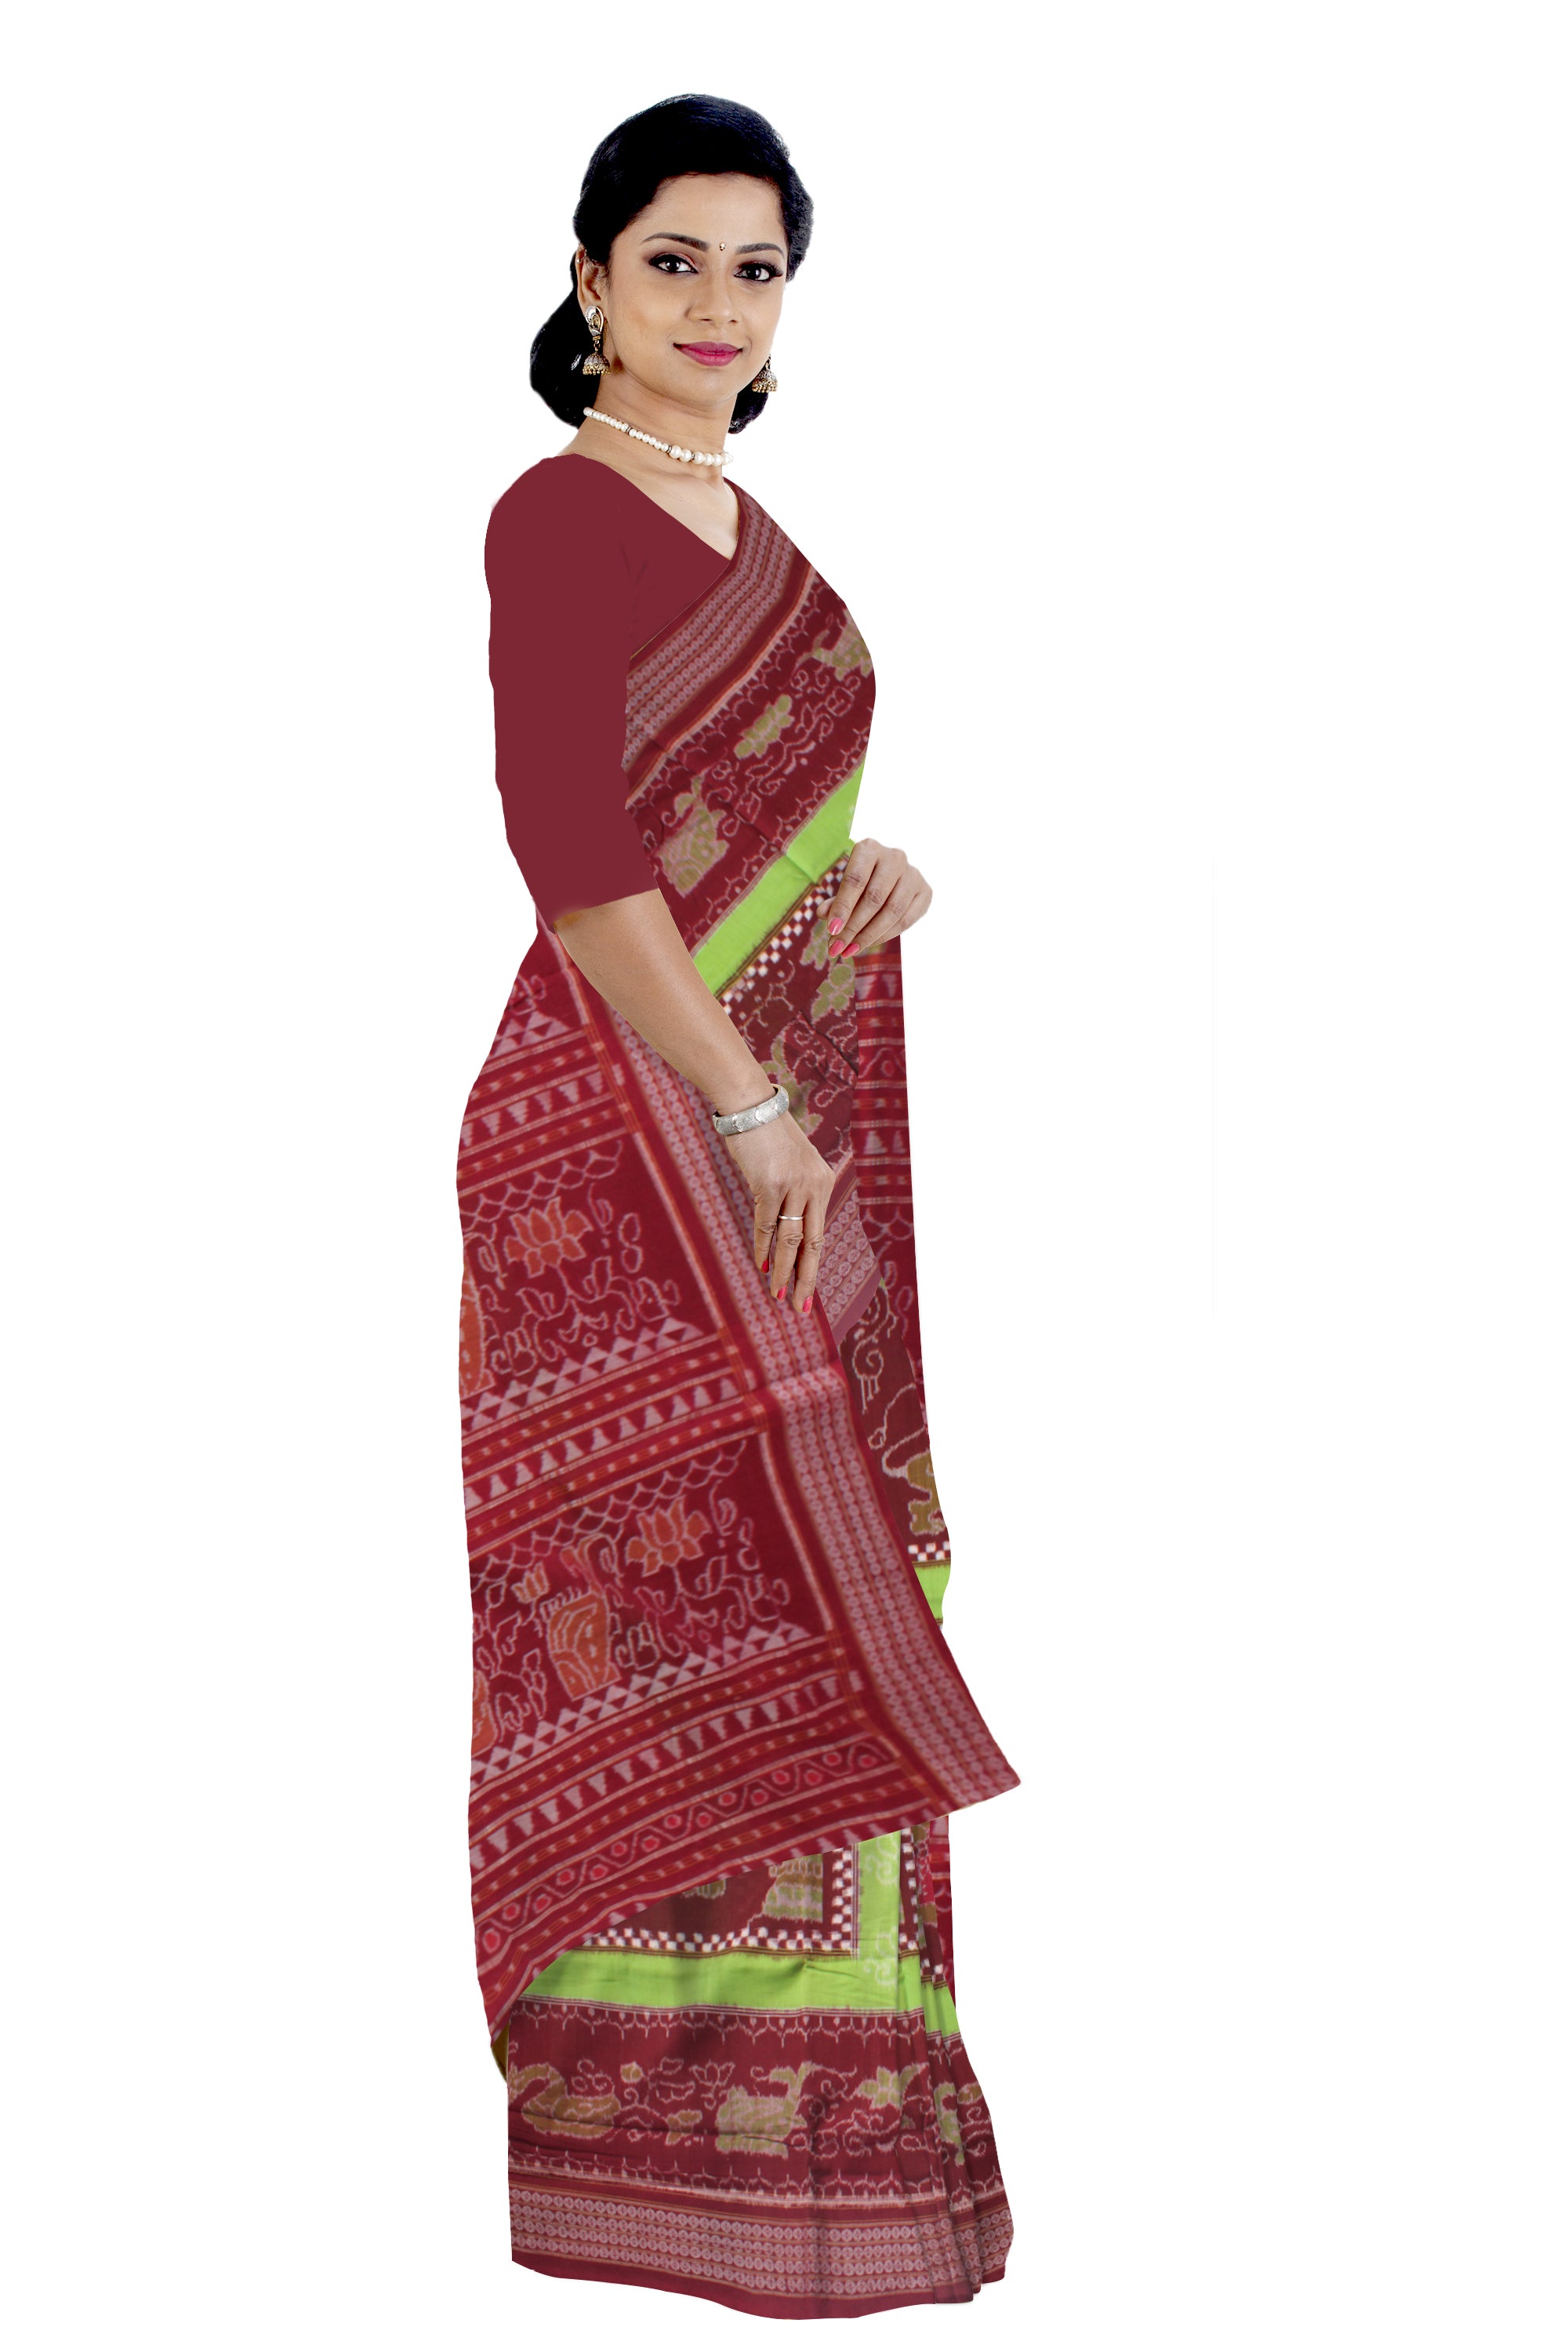 LIGHT GREEN AND MAROON COLOR BOX PATTERN PURE COTTON SAREE IS DESIGN LIKE- NARTAKI,LION AND BIRD PATTERN,WITHOUT BLOUSE PIECE. - Koshali Arts & Crafts Enterprise